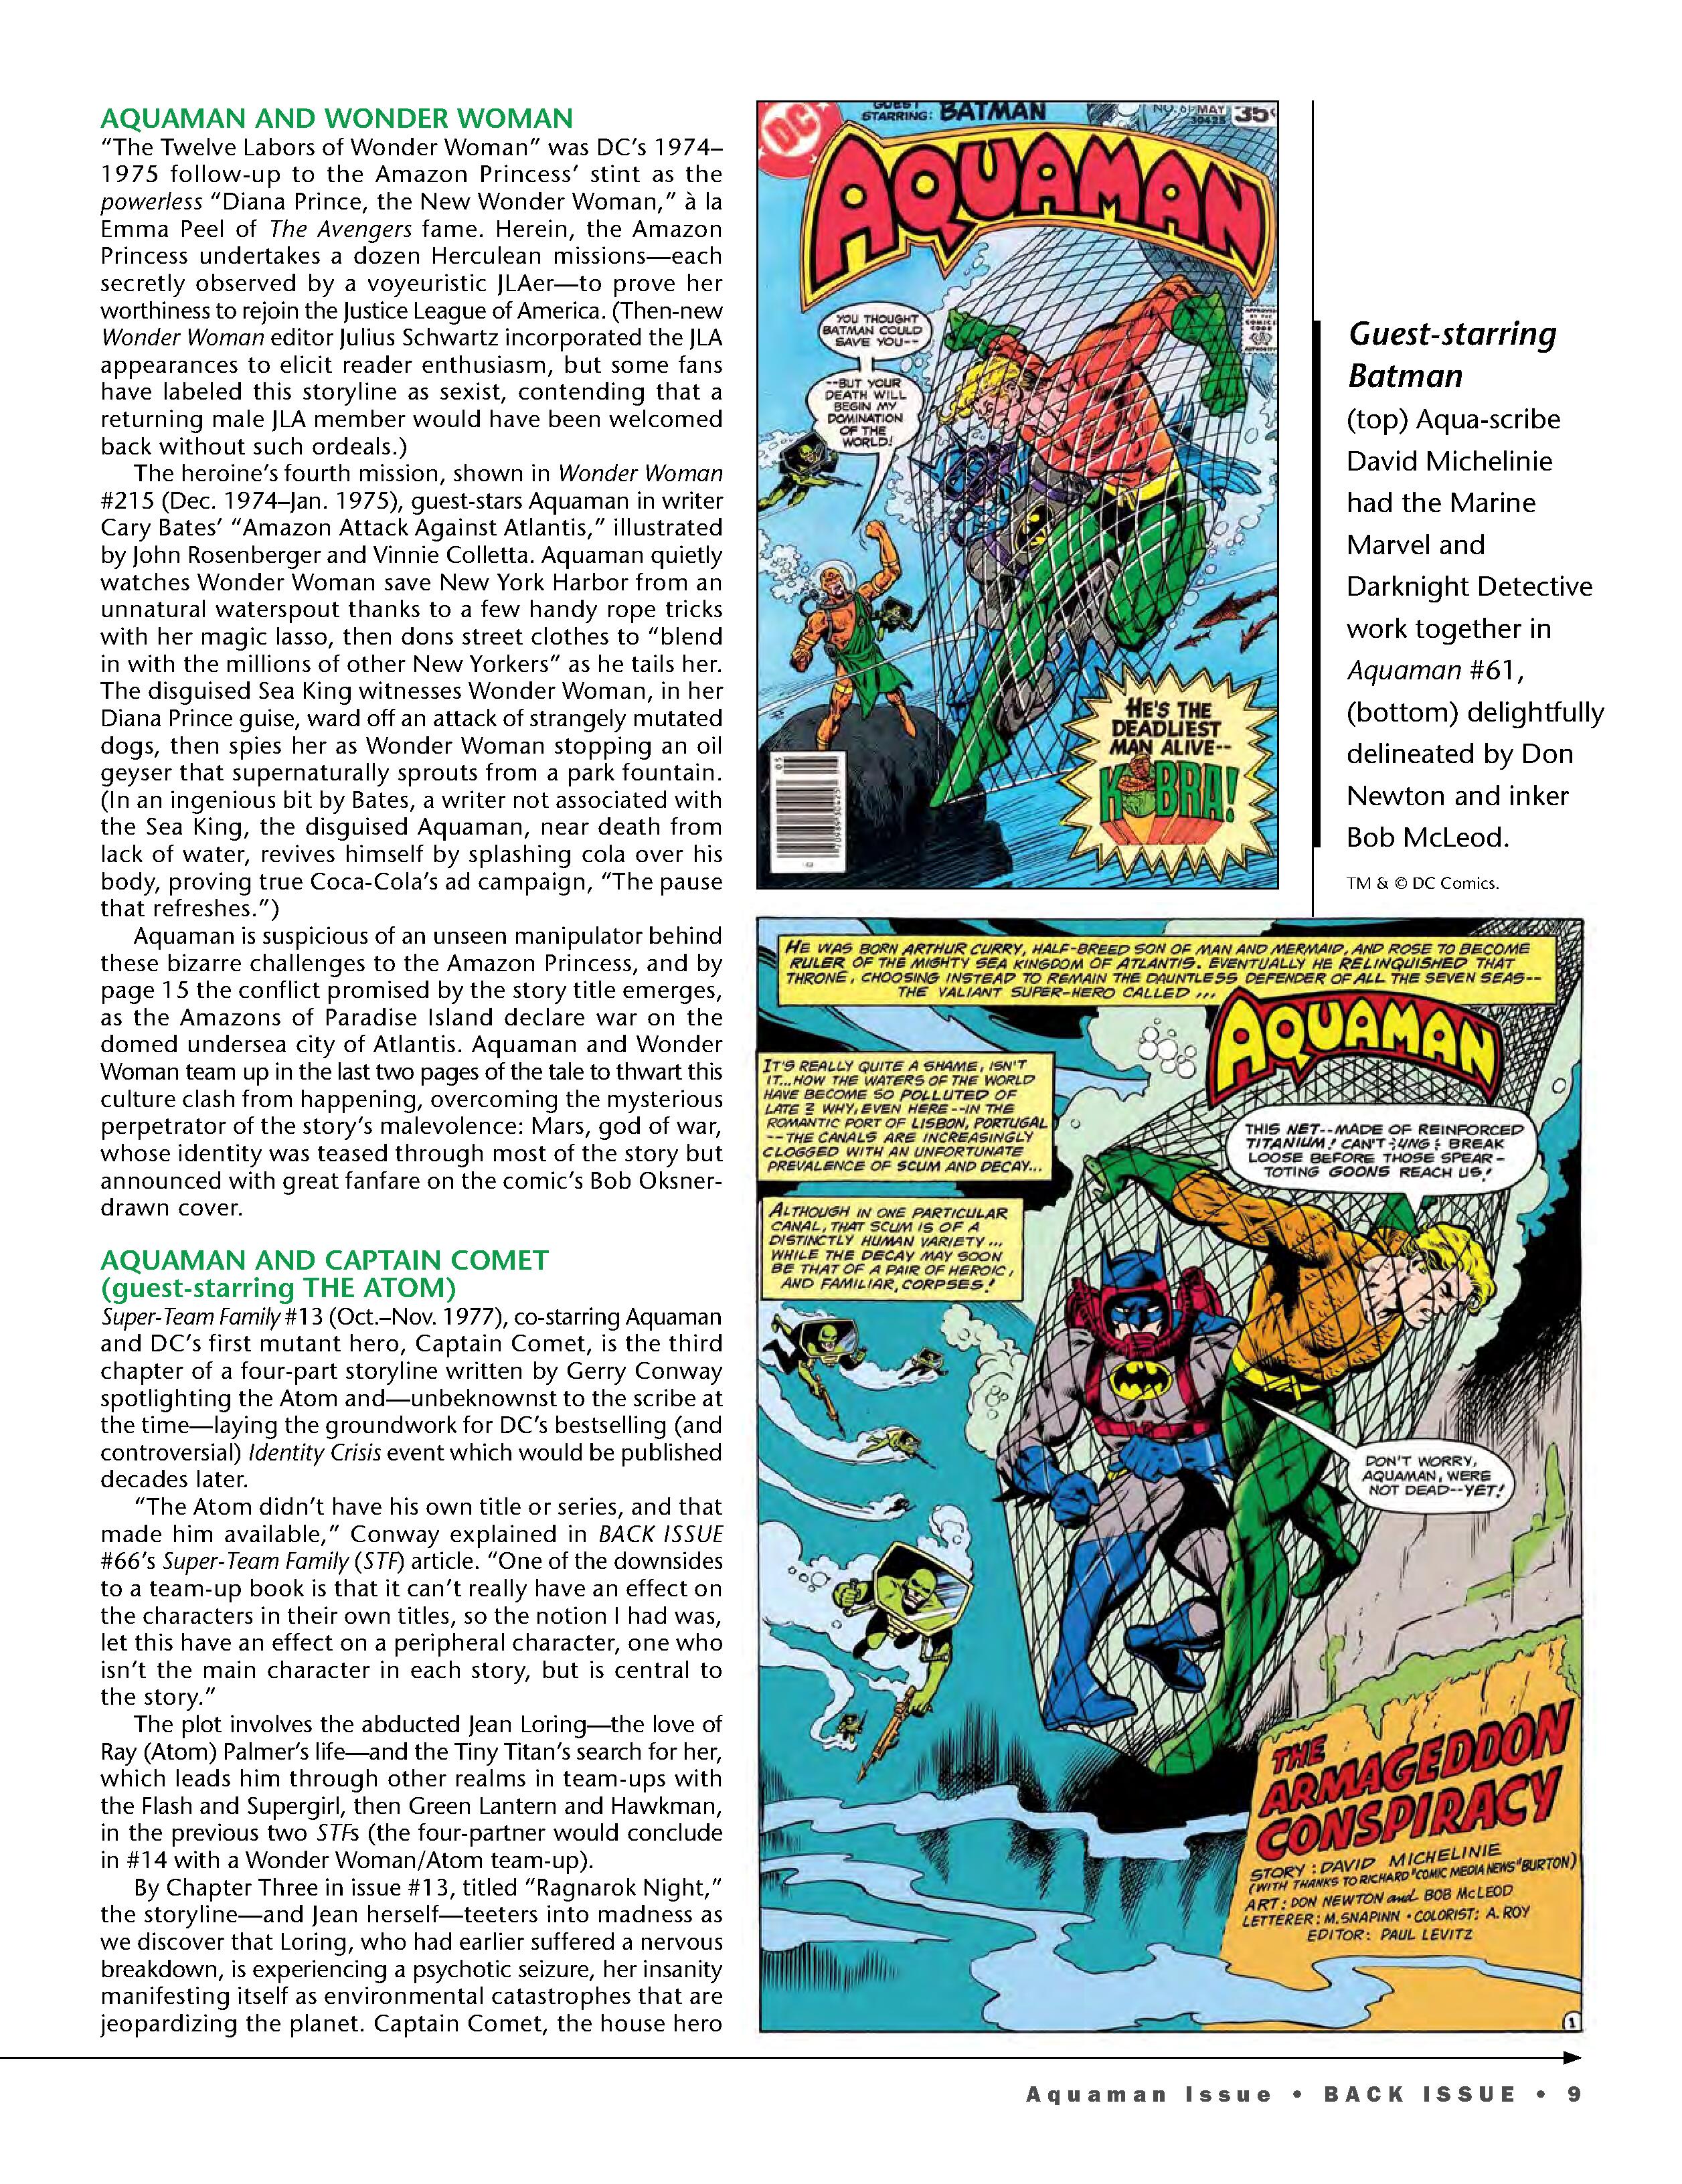 Read online Back Issue comic -  Issue #108 - 11